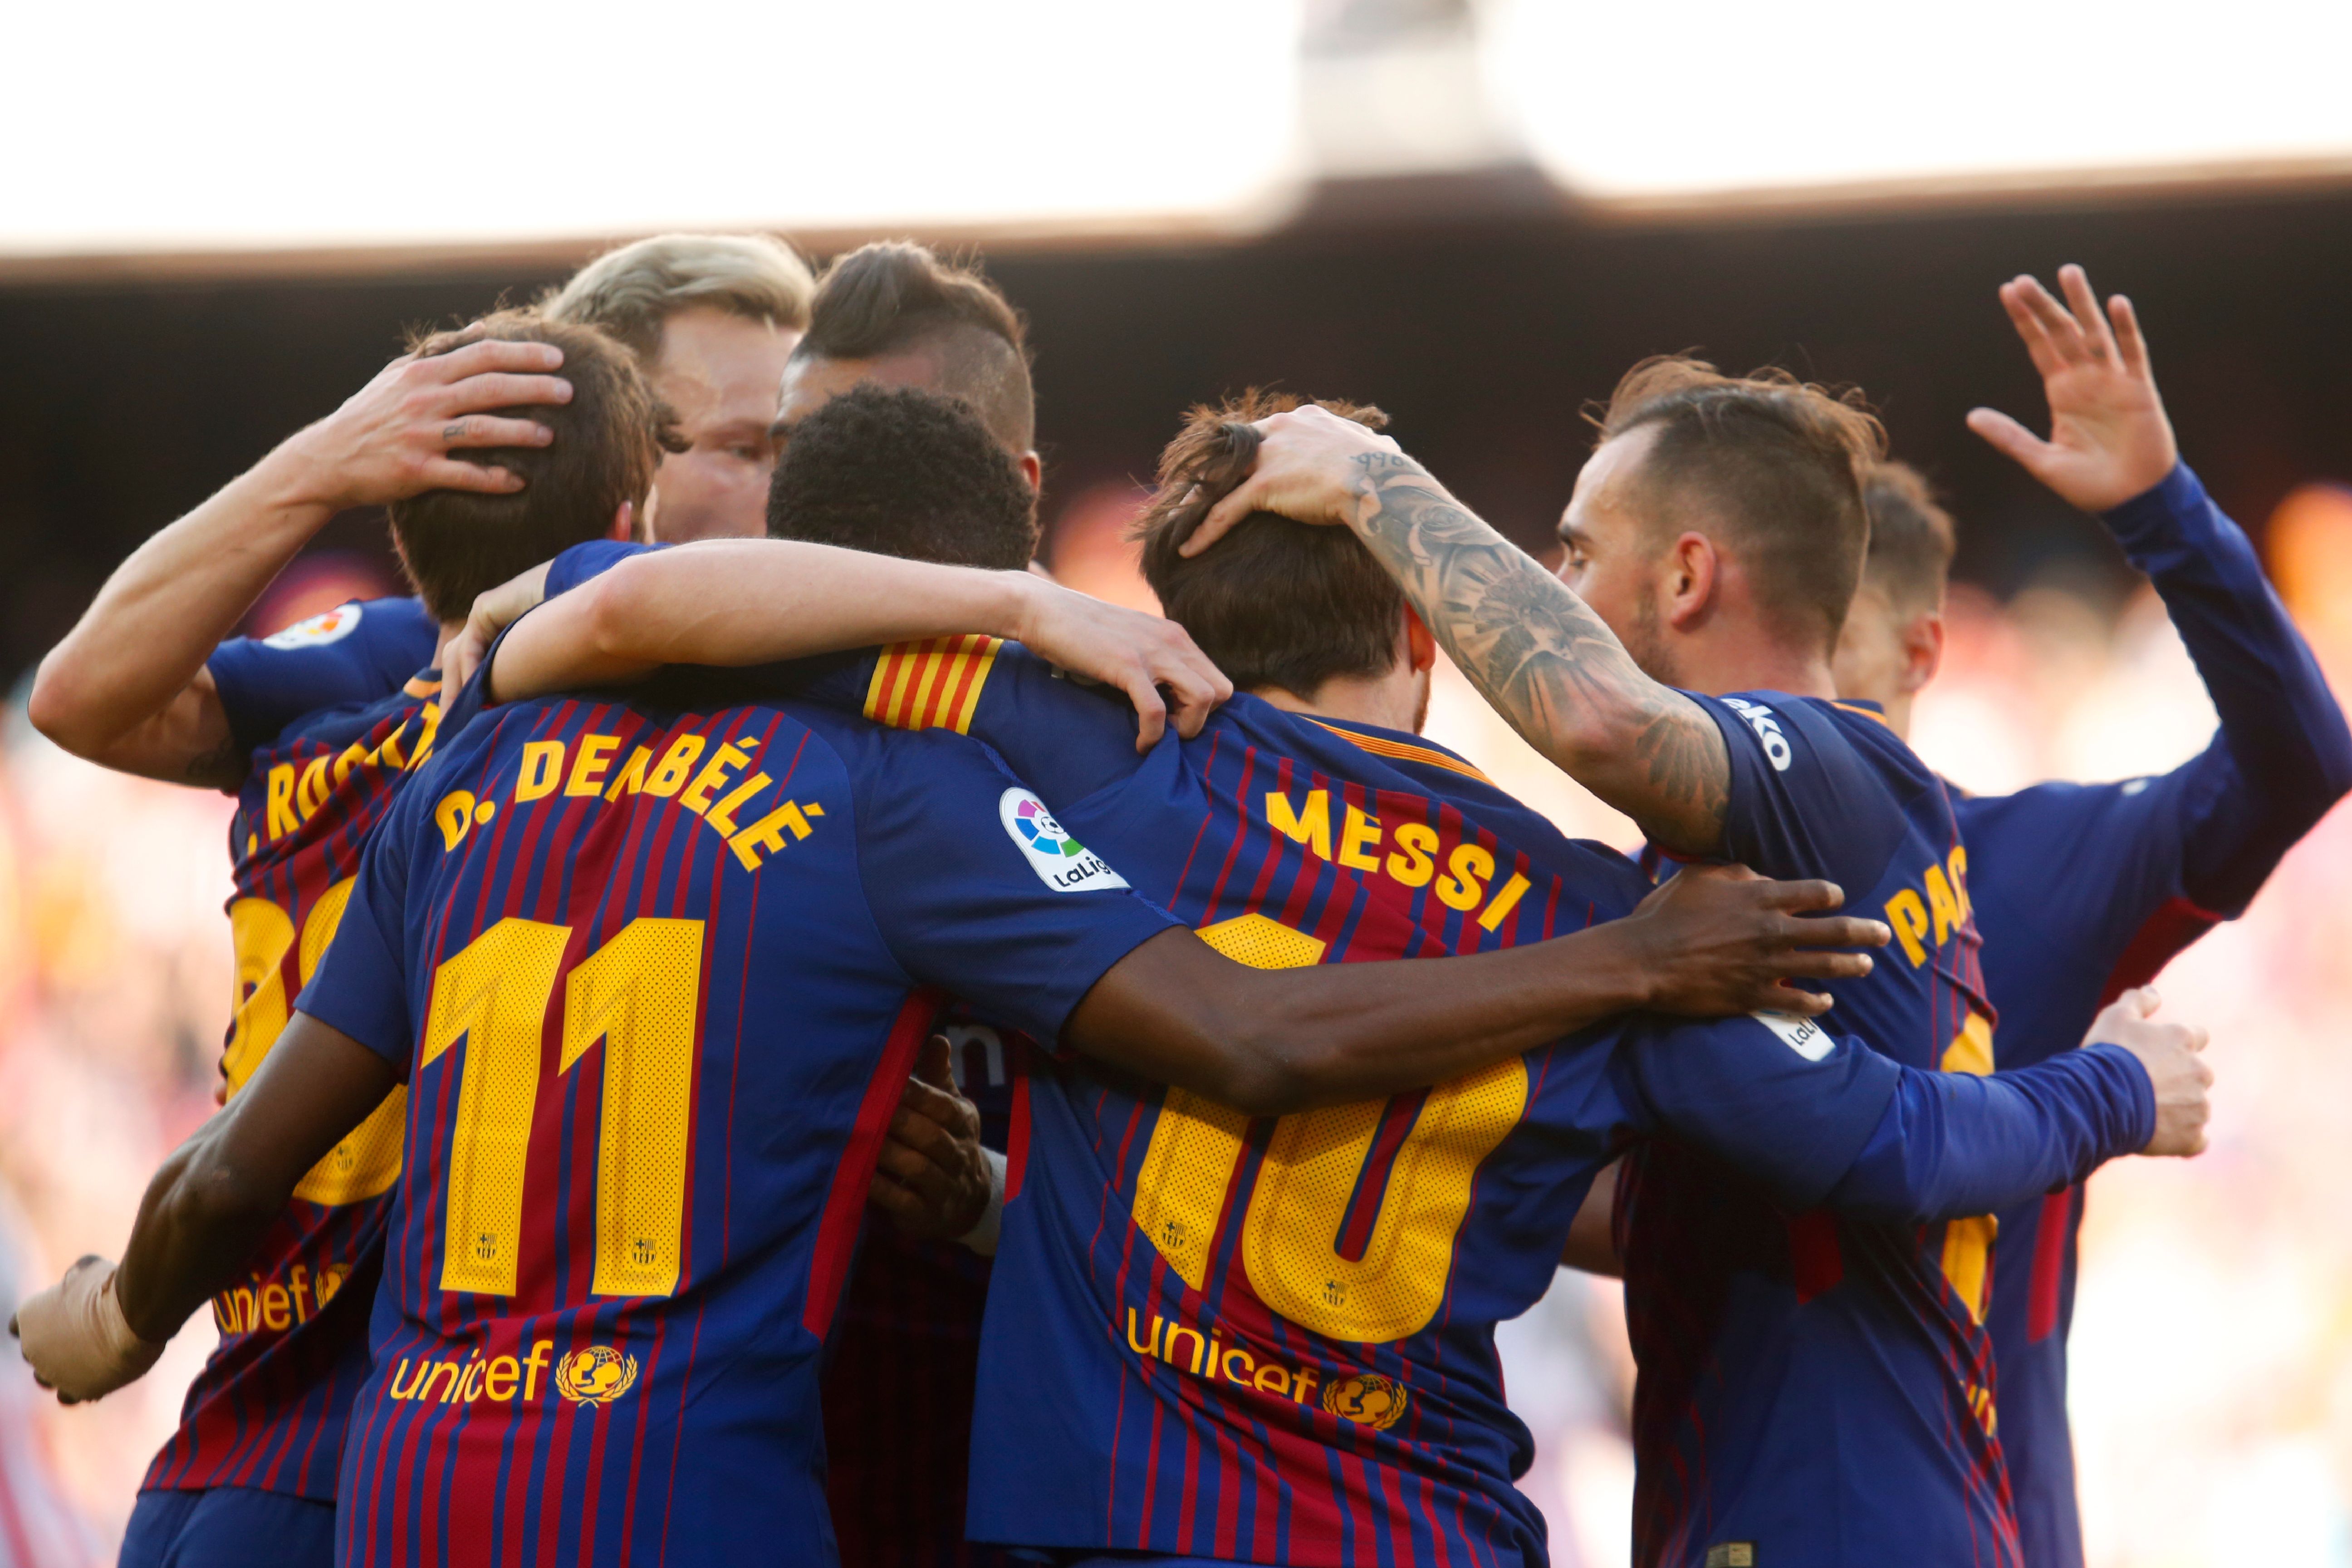 Barcelona's Argentinian forward Lionel Messi (C) celebrates with teammates after scoring during the Spanish League football match between FC Barcelona and Athletic Club Bilbao at the Camp Nou stadium in Barcelona on March 18, 2018. / AFP PHOTO / Pau Barrena        (Photo credit should read PAU BARRENA/AFP/Getty Images)